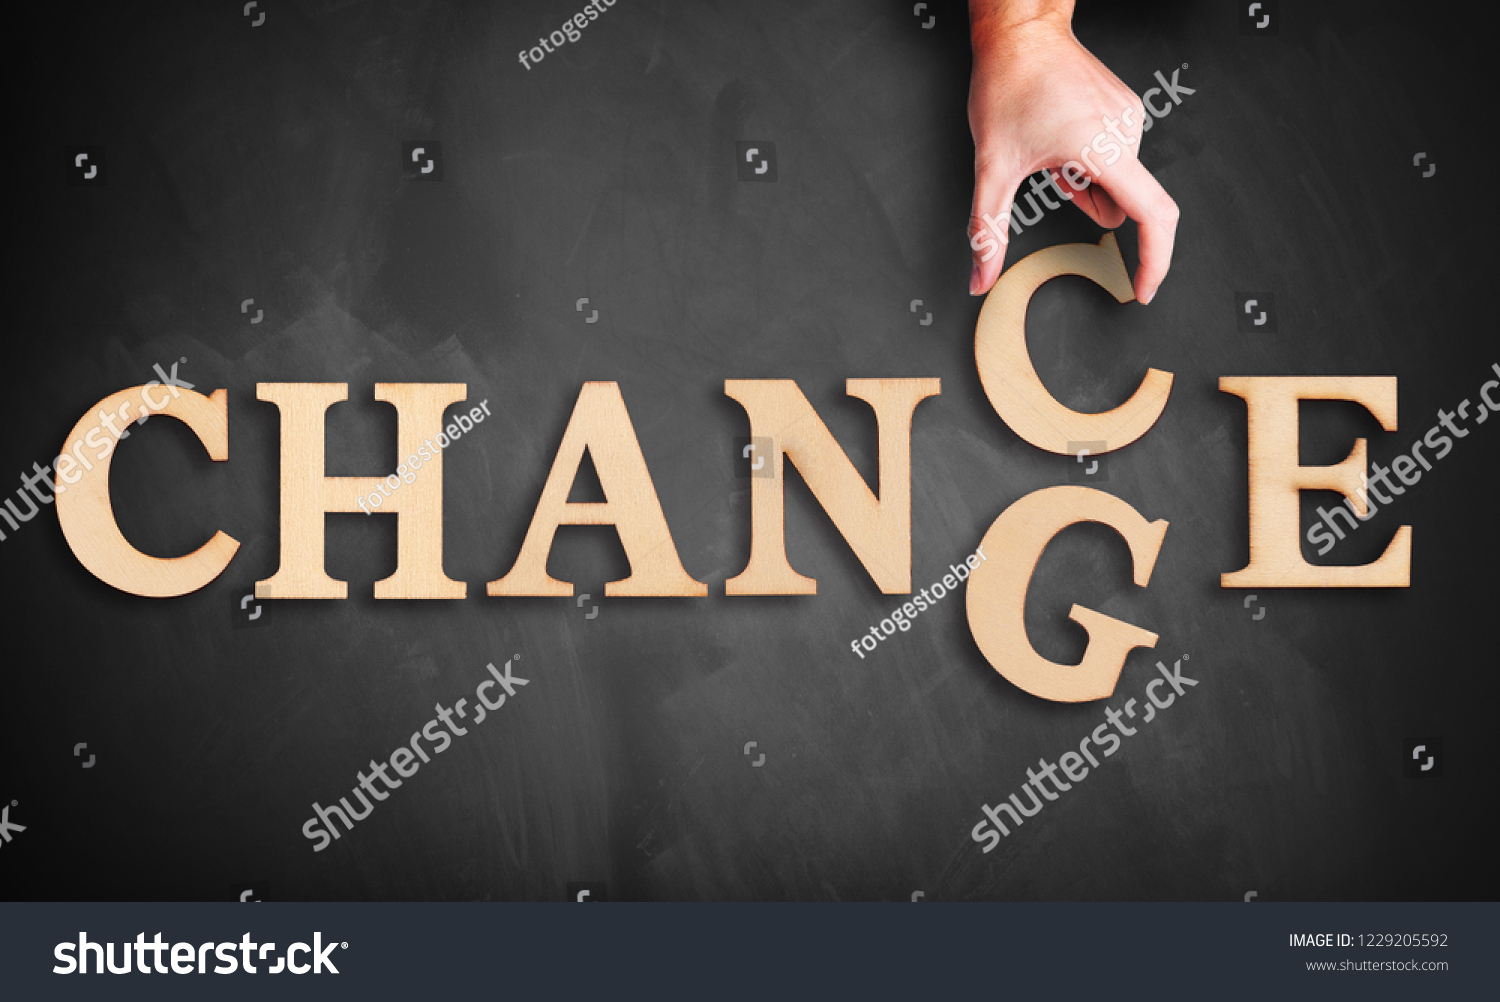 hand is moving a wooden letter, turning the word "change" to "chance" on a blackboard #1229205592